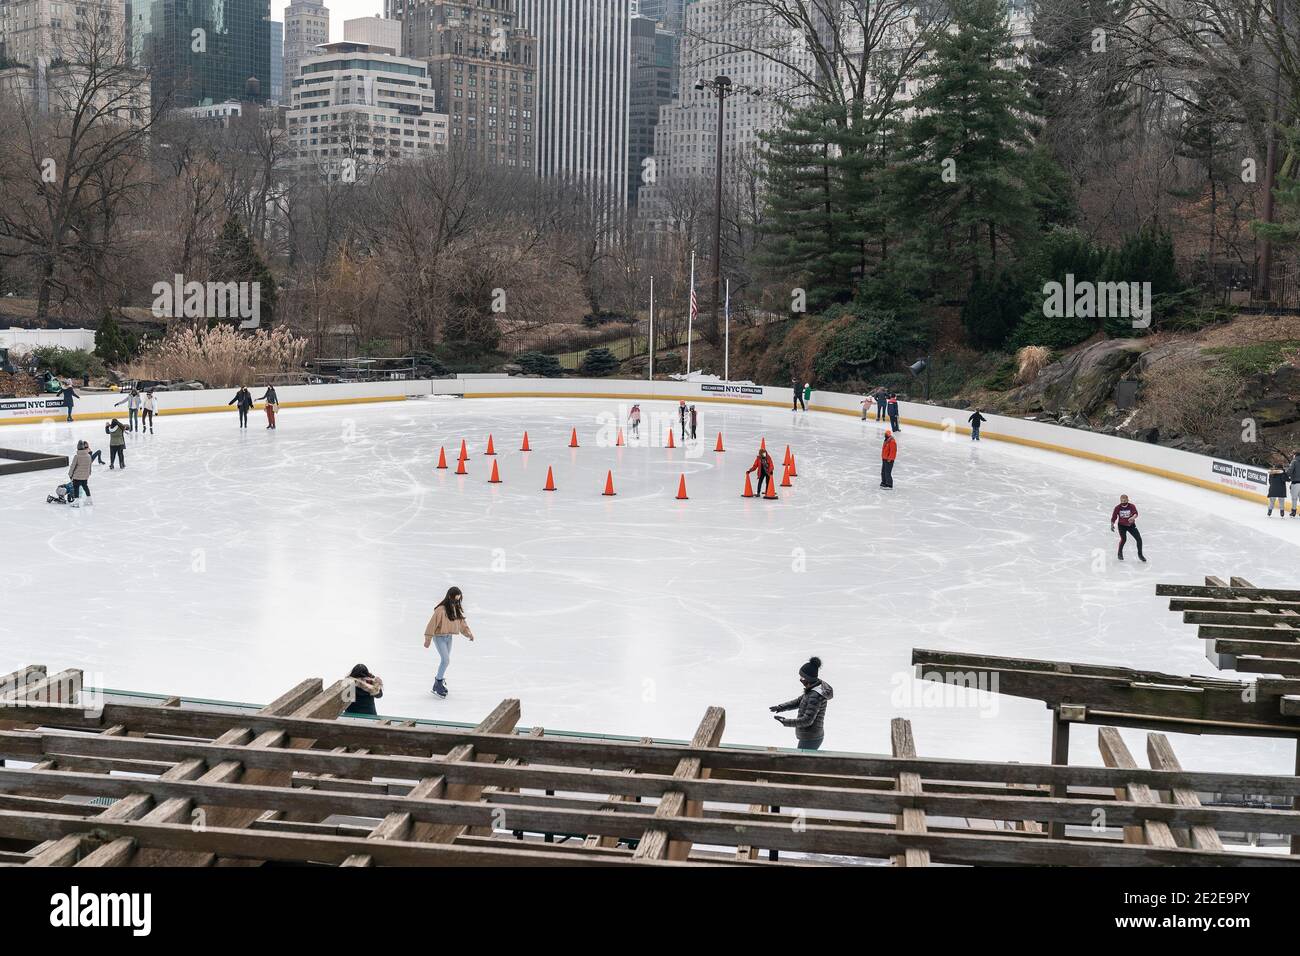 New York, United States. 13th Jan, 2021. View of the Central Park Wollman skating rink which is managed by Trump Organization in New York on January 13, 2021. NYC announced that is taking steps to terminate Trump Organization agreements with the City. Agreements will terminated because of deadly insurrection at the U.S. Capitol incited by President Trump. (Photo by Lev Radin/Sipa USA) Credit: Sipa USA/Alamy Live News Stock Photo